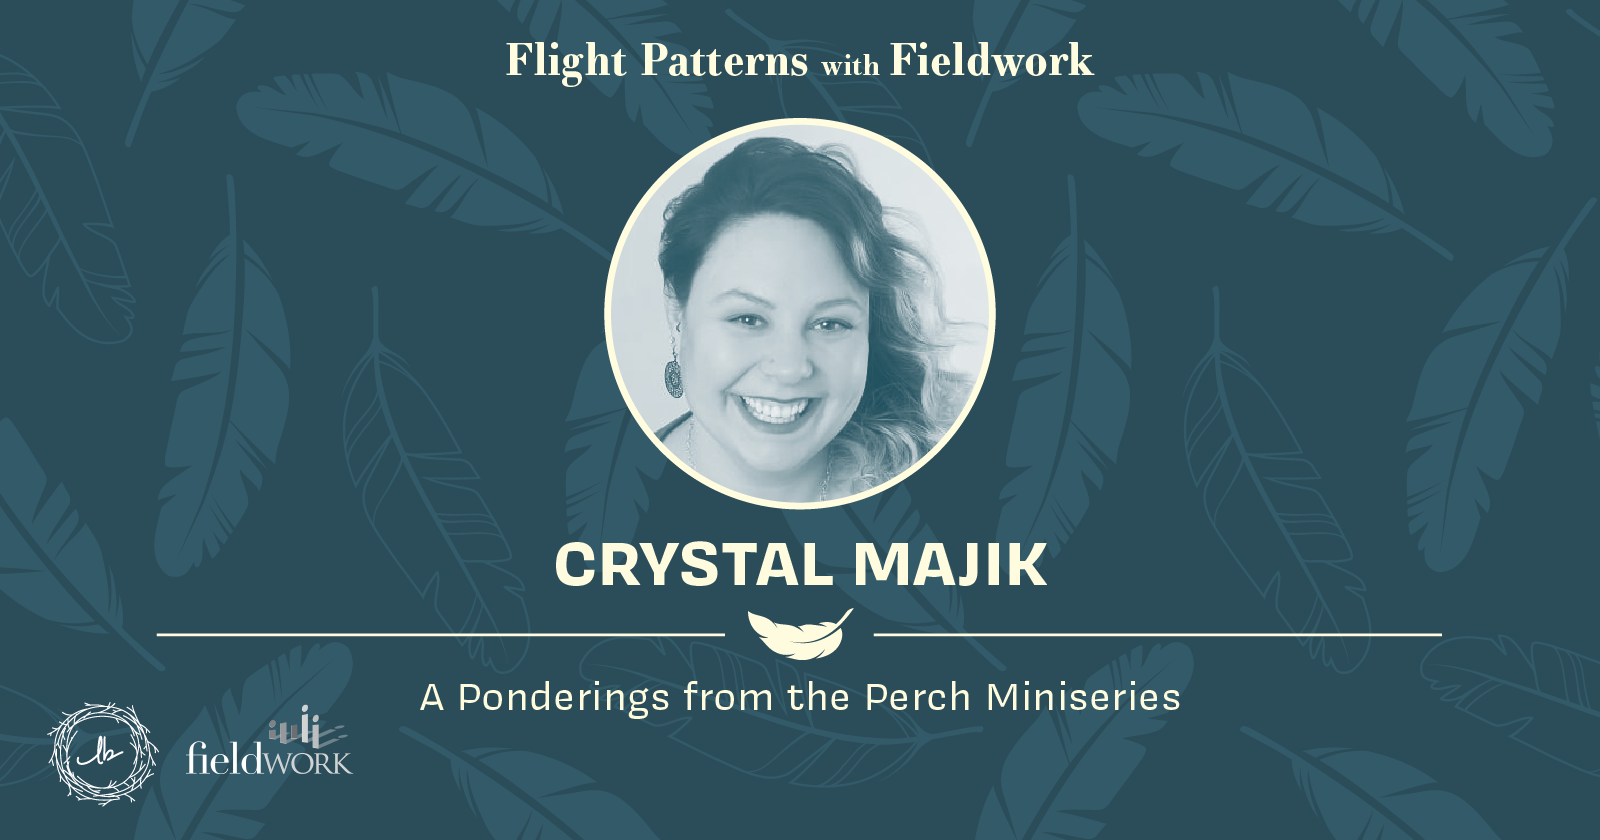 Preparing for the Future of Research with Crystal Majik